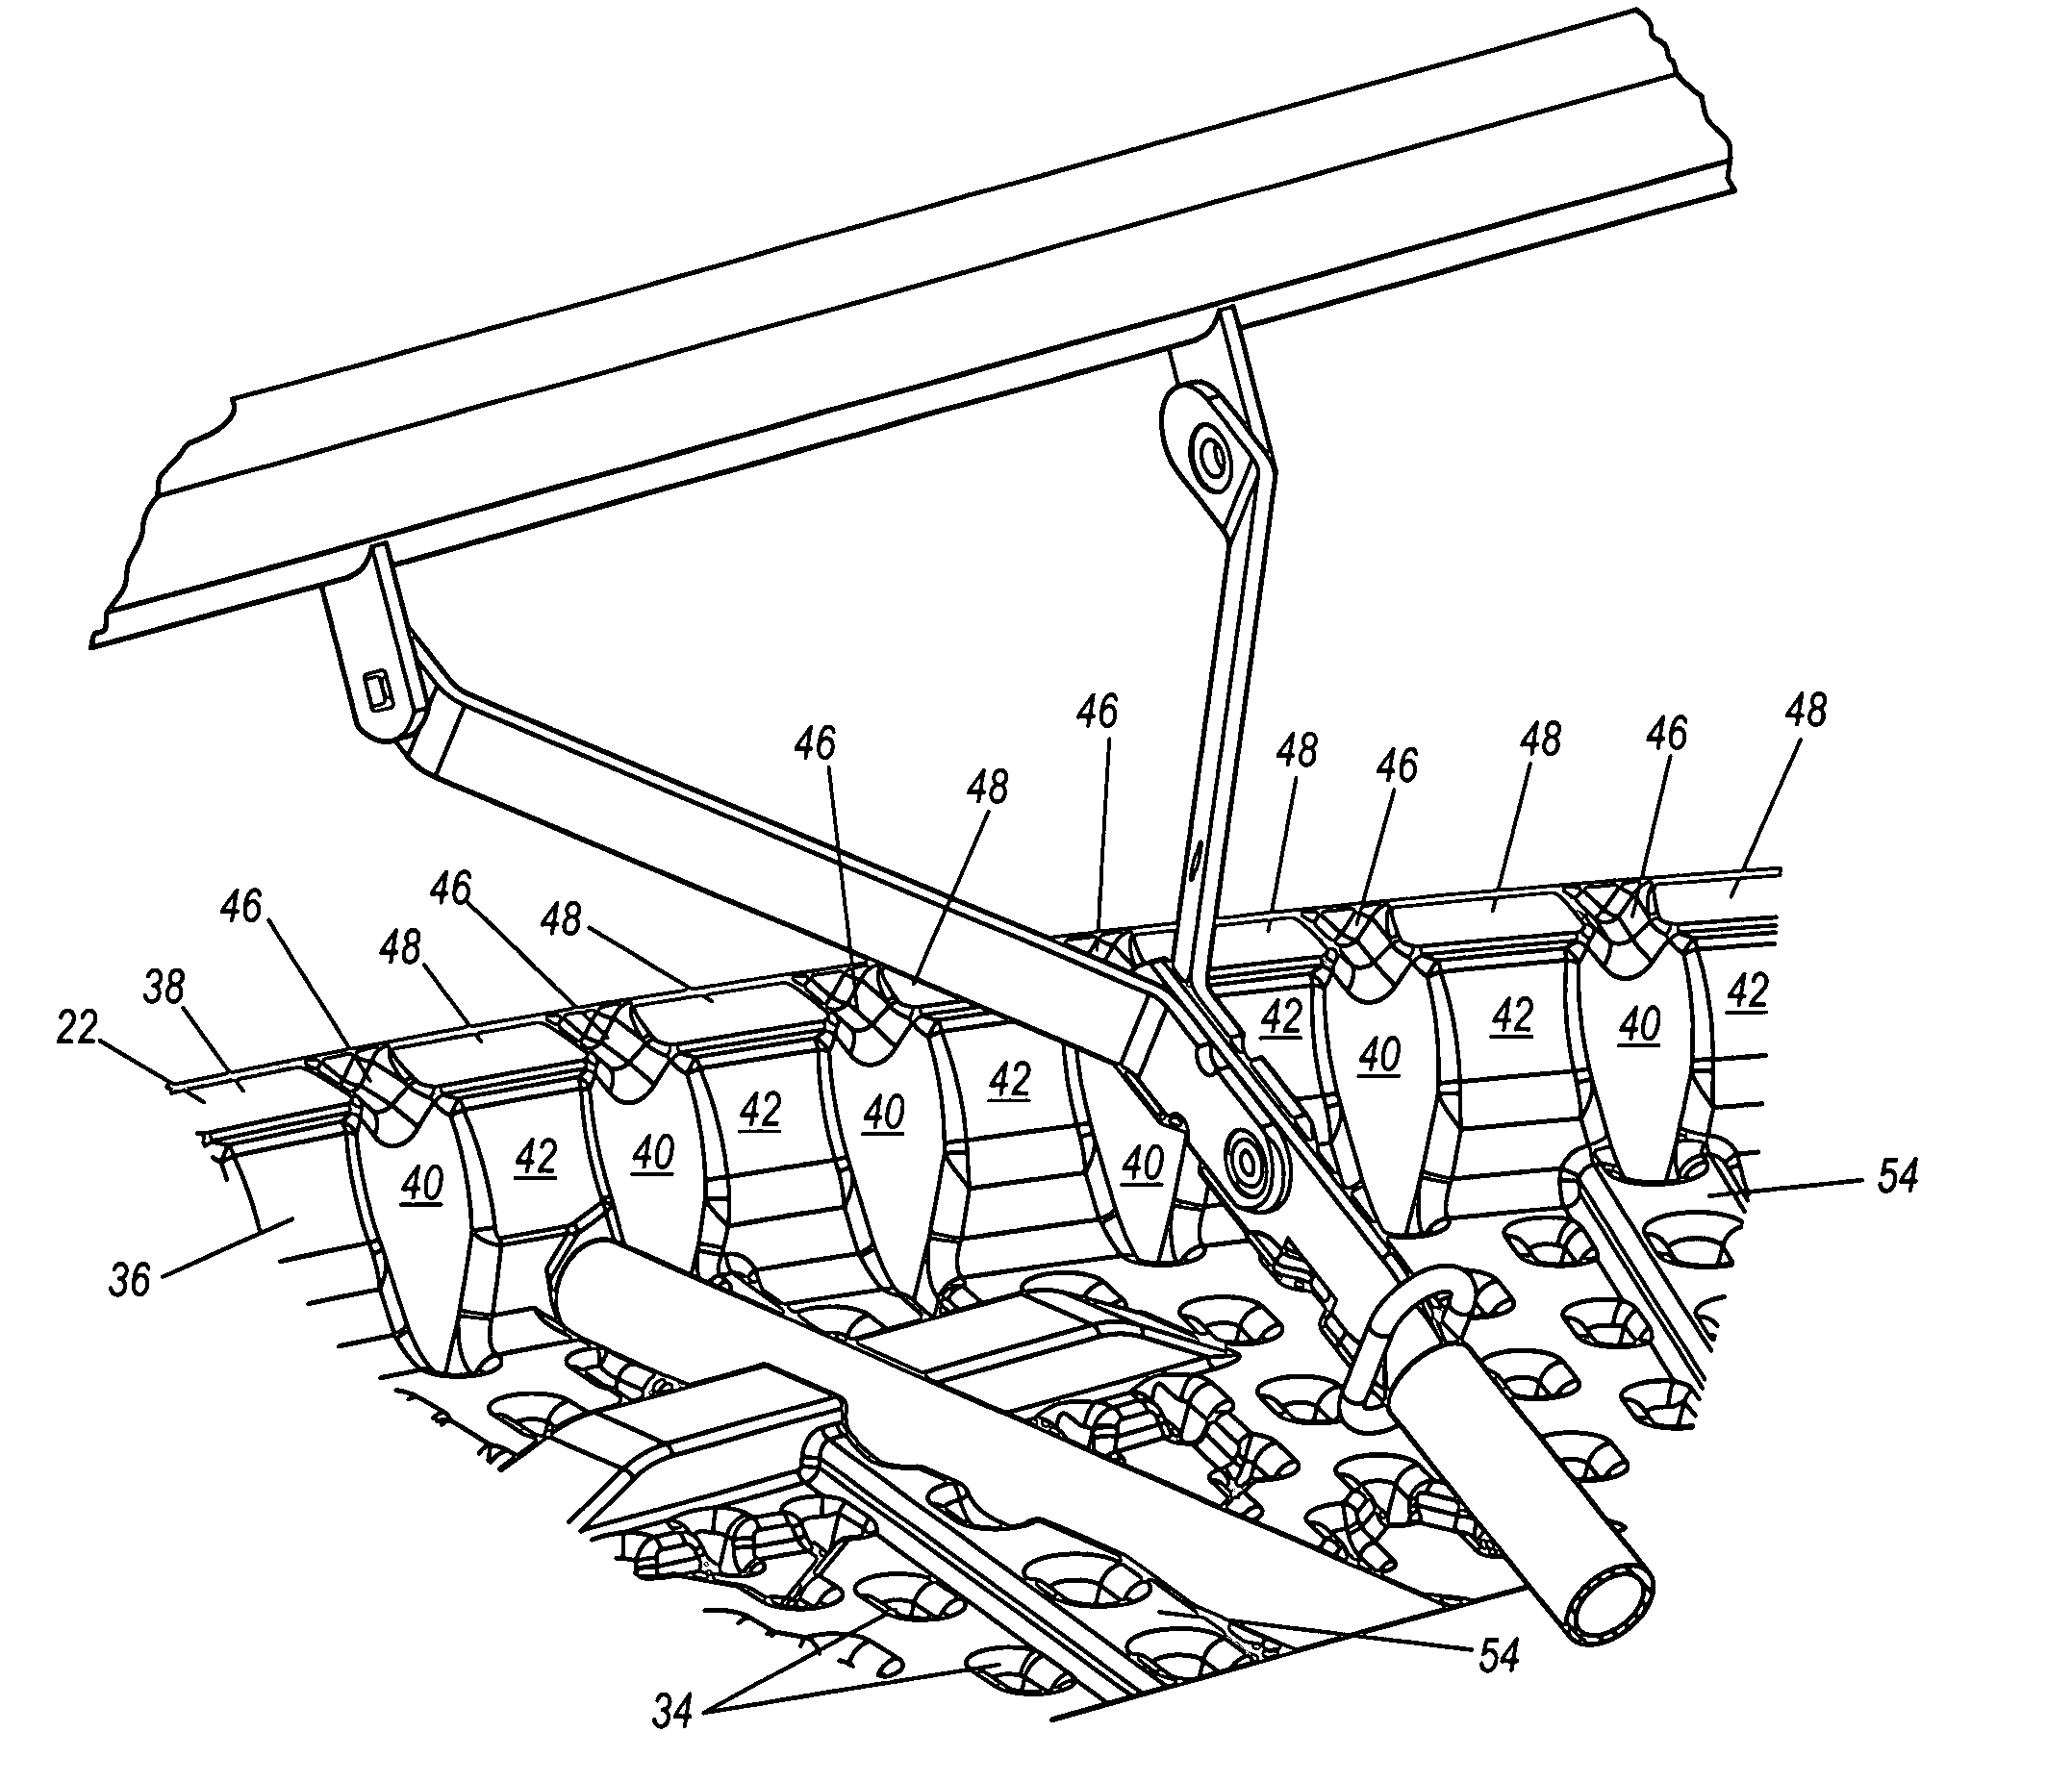 Table with edge support structures